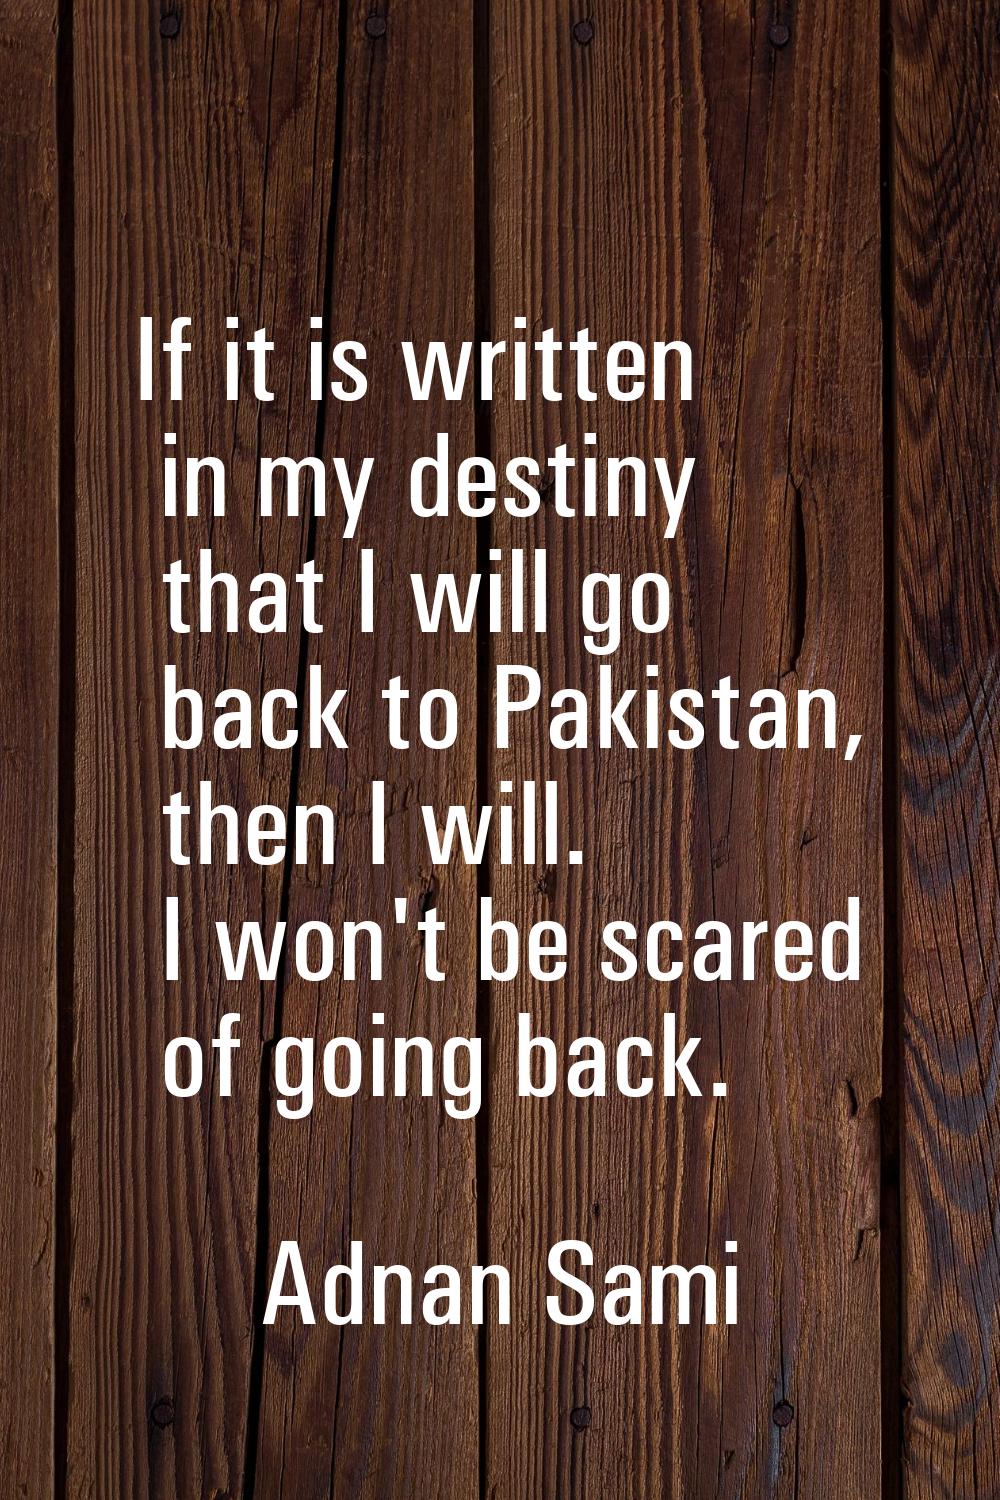 If it is written in my destiny that I will go back to Pakistan, then I will. I won't be scared of g